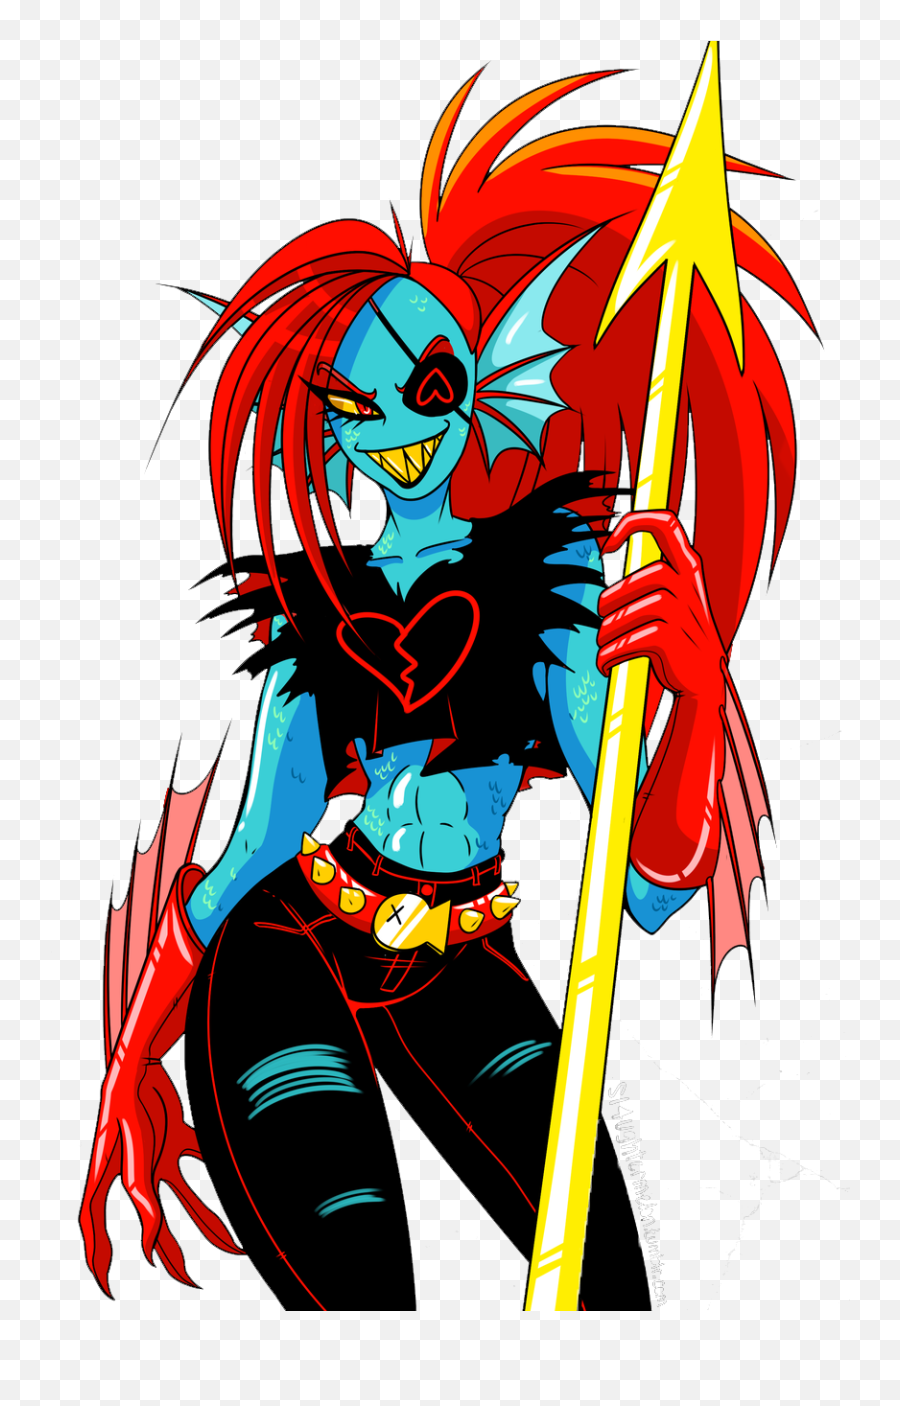 Undyne Png 8 Image - Underfell Undyne,Undyne Png